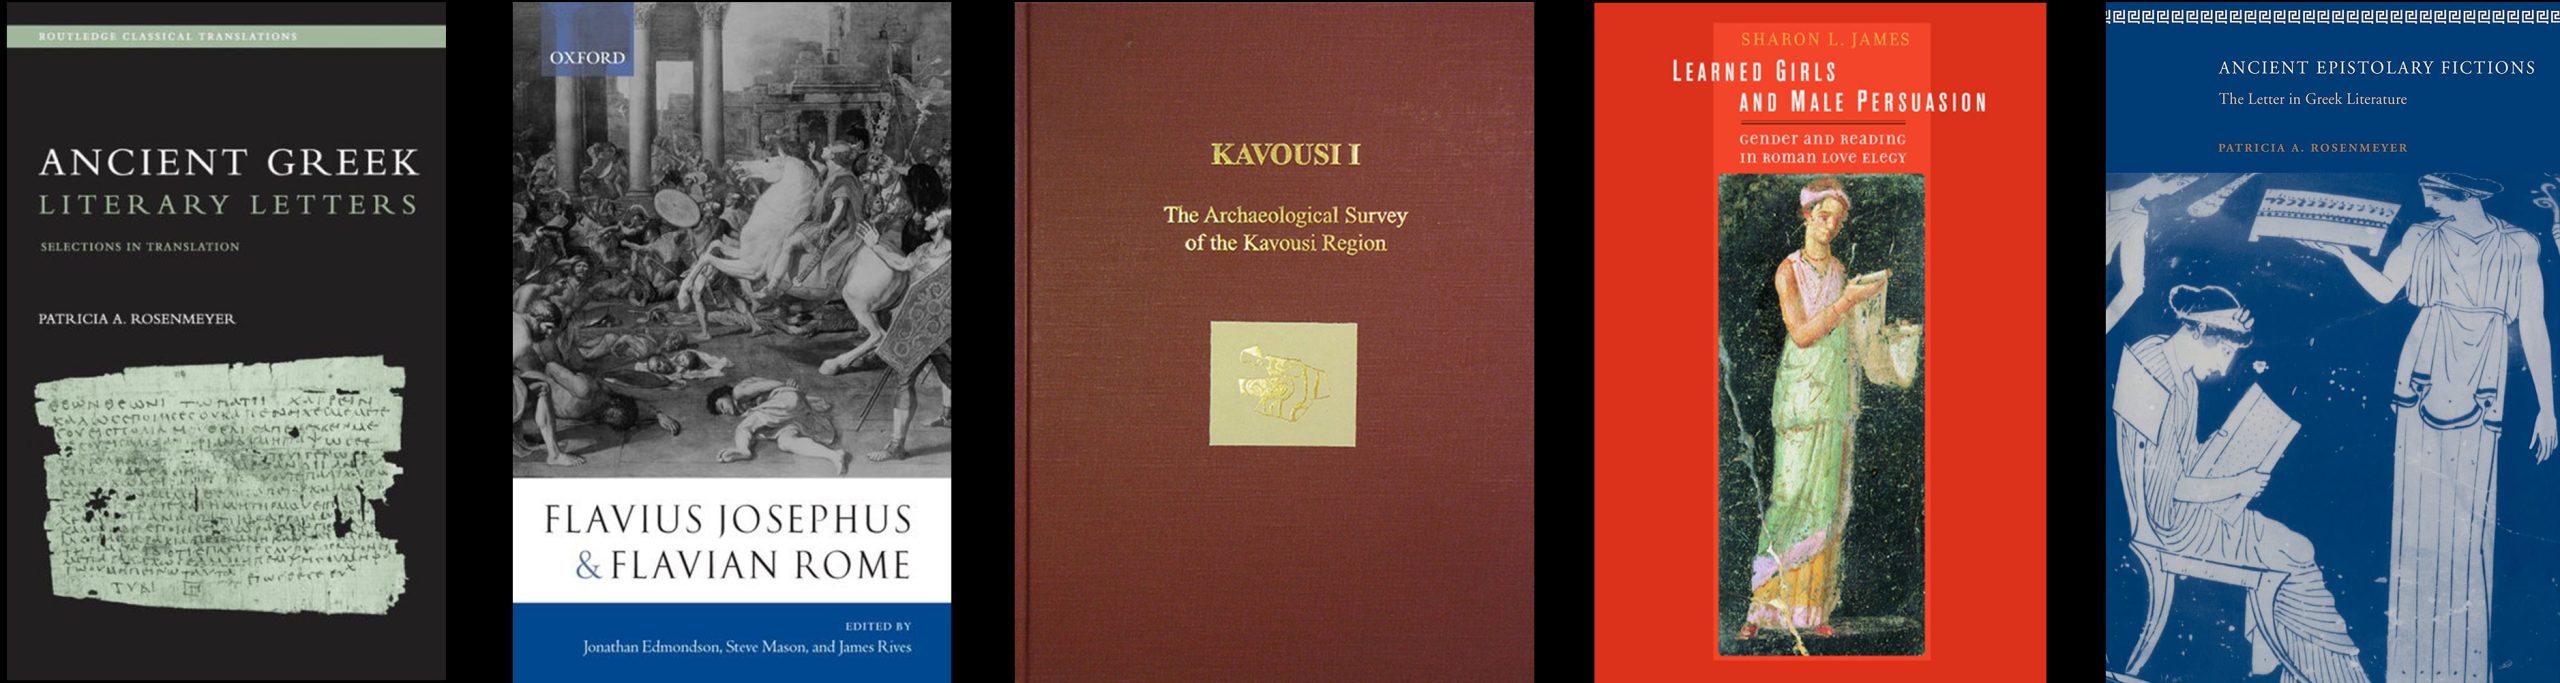 First Book: Ancient Greek Literary Letters: Selections in Translation, Patricia A. Rosenmeyer. Second book: Flavius Joseph and Flavian Rome, edited by Jonathan Edmondson, Steve Mason, and James Rives. Third Book: Kavousi I: The Archaeological Survey of the Kavousi Region. Fourth Book: Learned Girls and Male Persuasion: Gender and Reading in Roman Love Elegy, Sharon L. James. Fifth Book: Ancient Epistolary Fictions: The Letter in Greek Literature, Patricia A. Rosenmeyer.